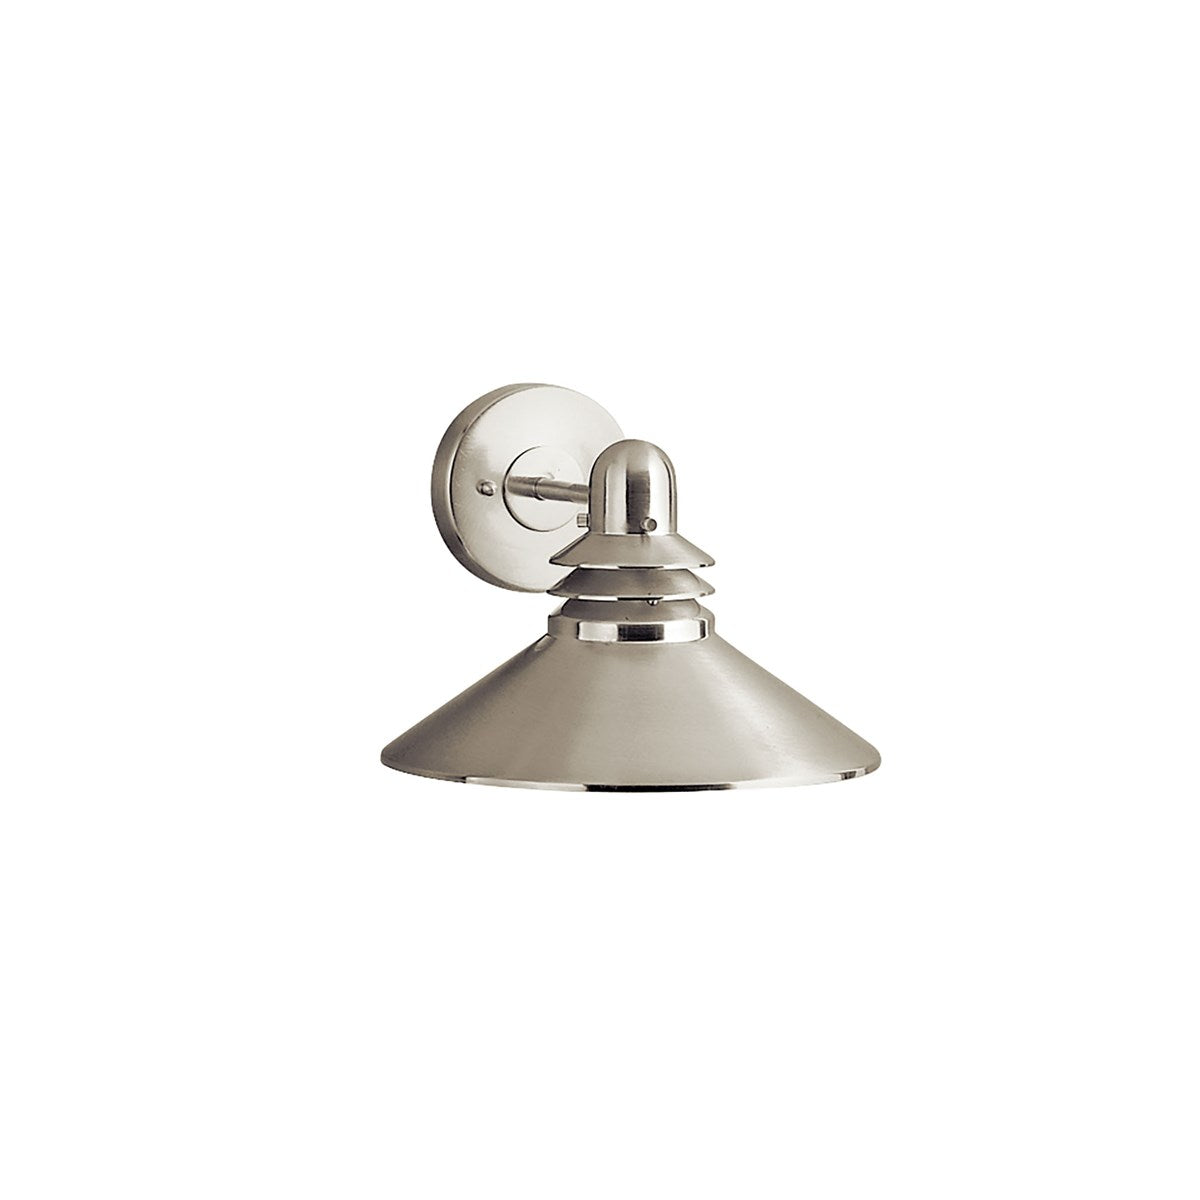 Grenoble 11 in. Outdoor Barn Lights Brushed Nickel Finish